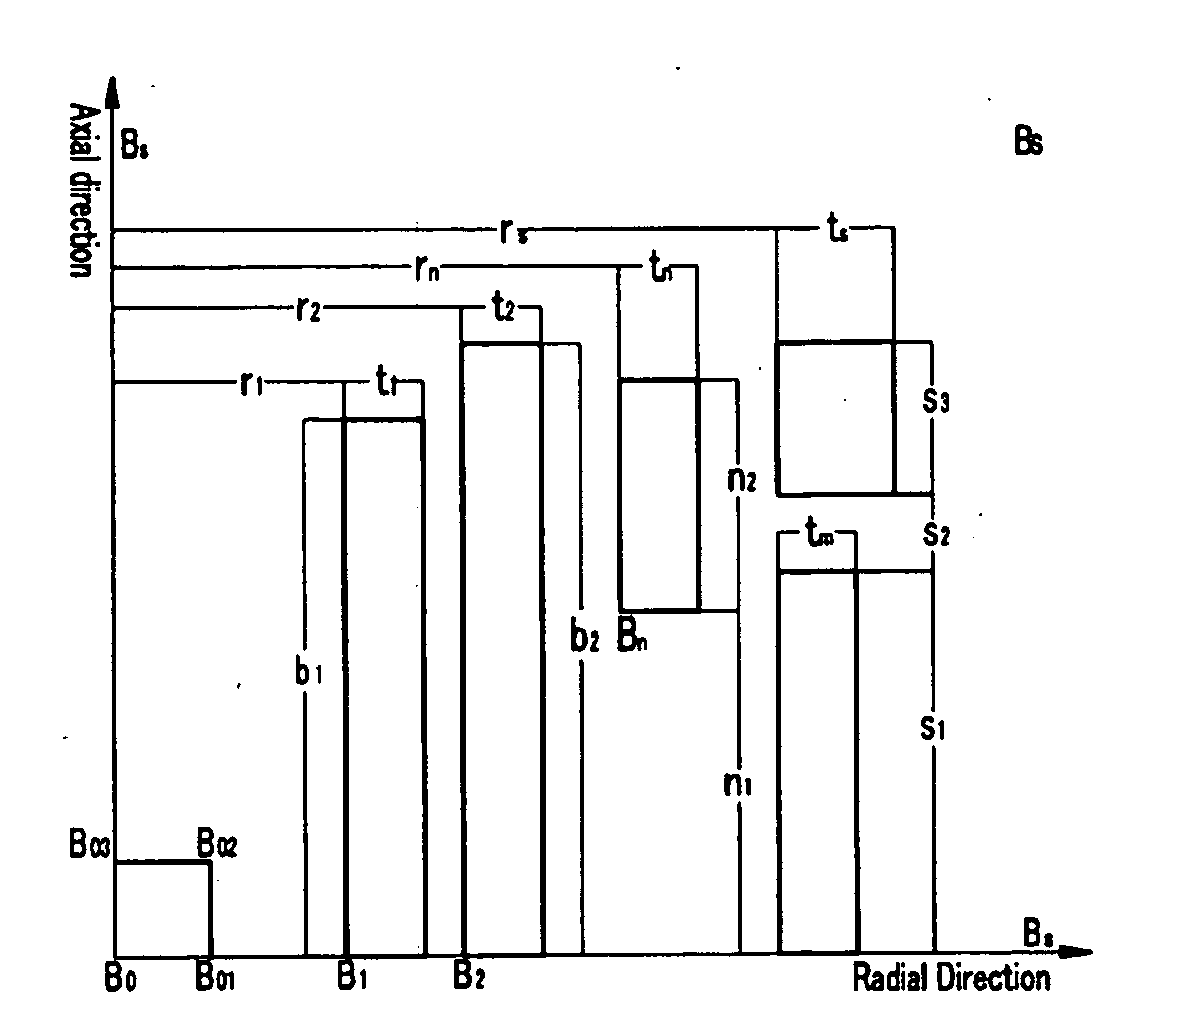 Design Method of High Magnetic Field Superconducting Magnet